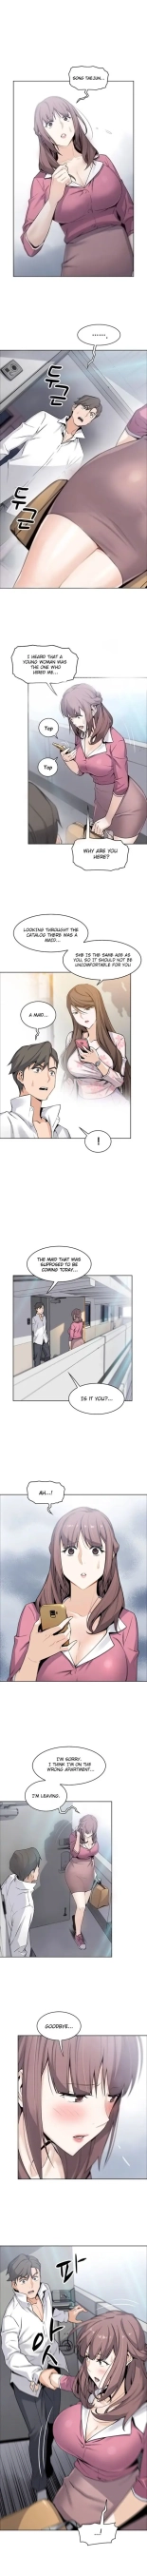 Housekeeper  Ch.4949   Completed : page 85